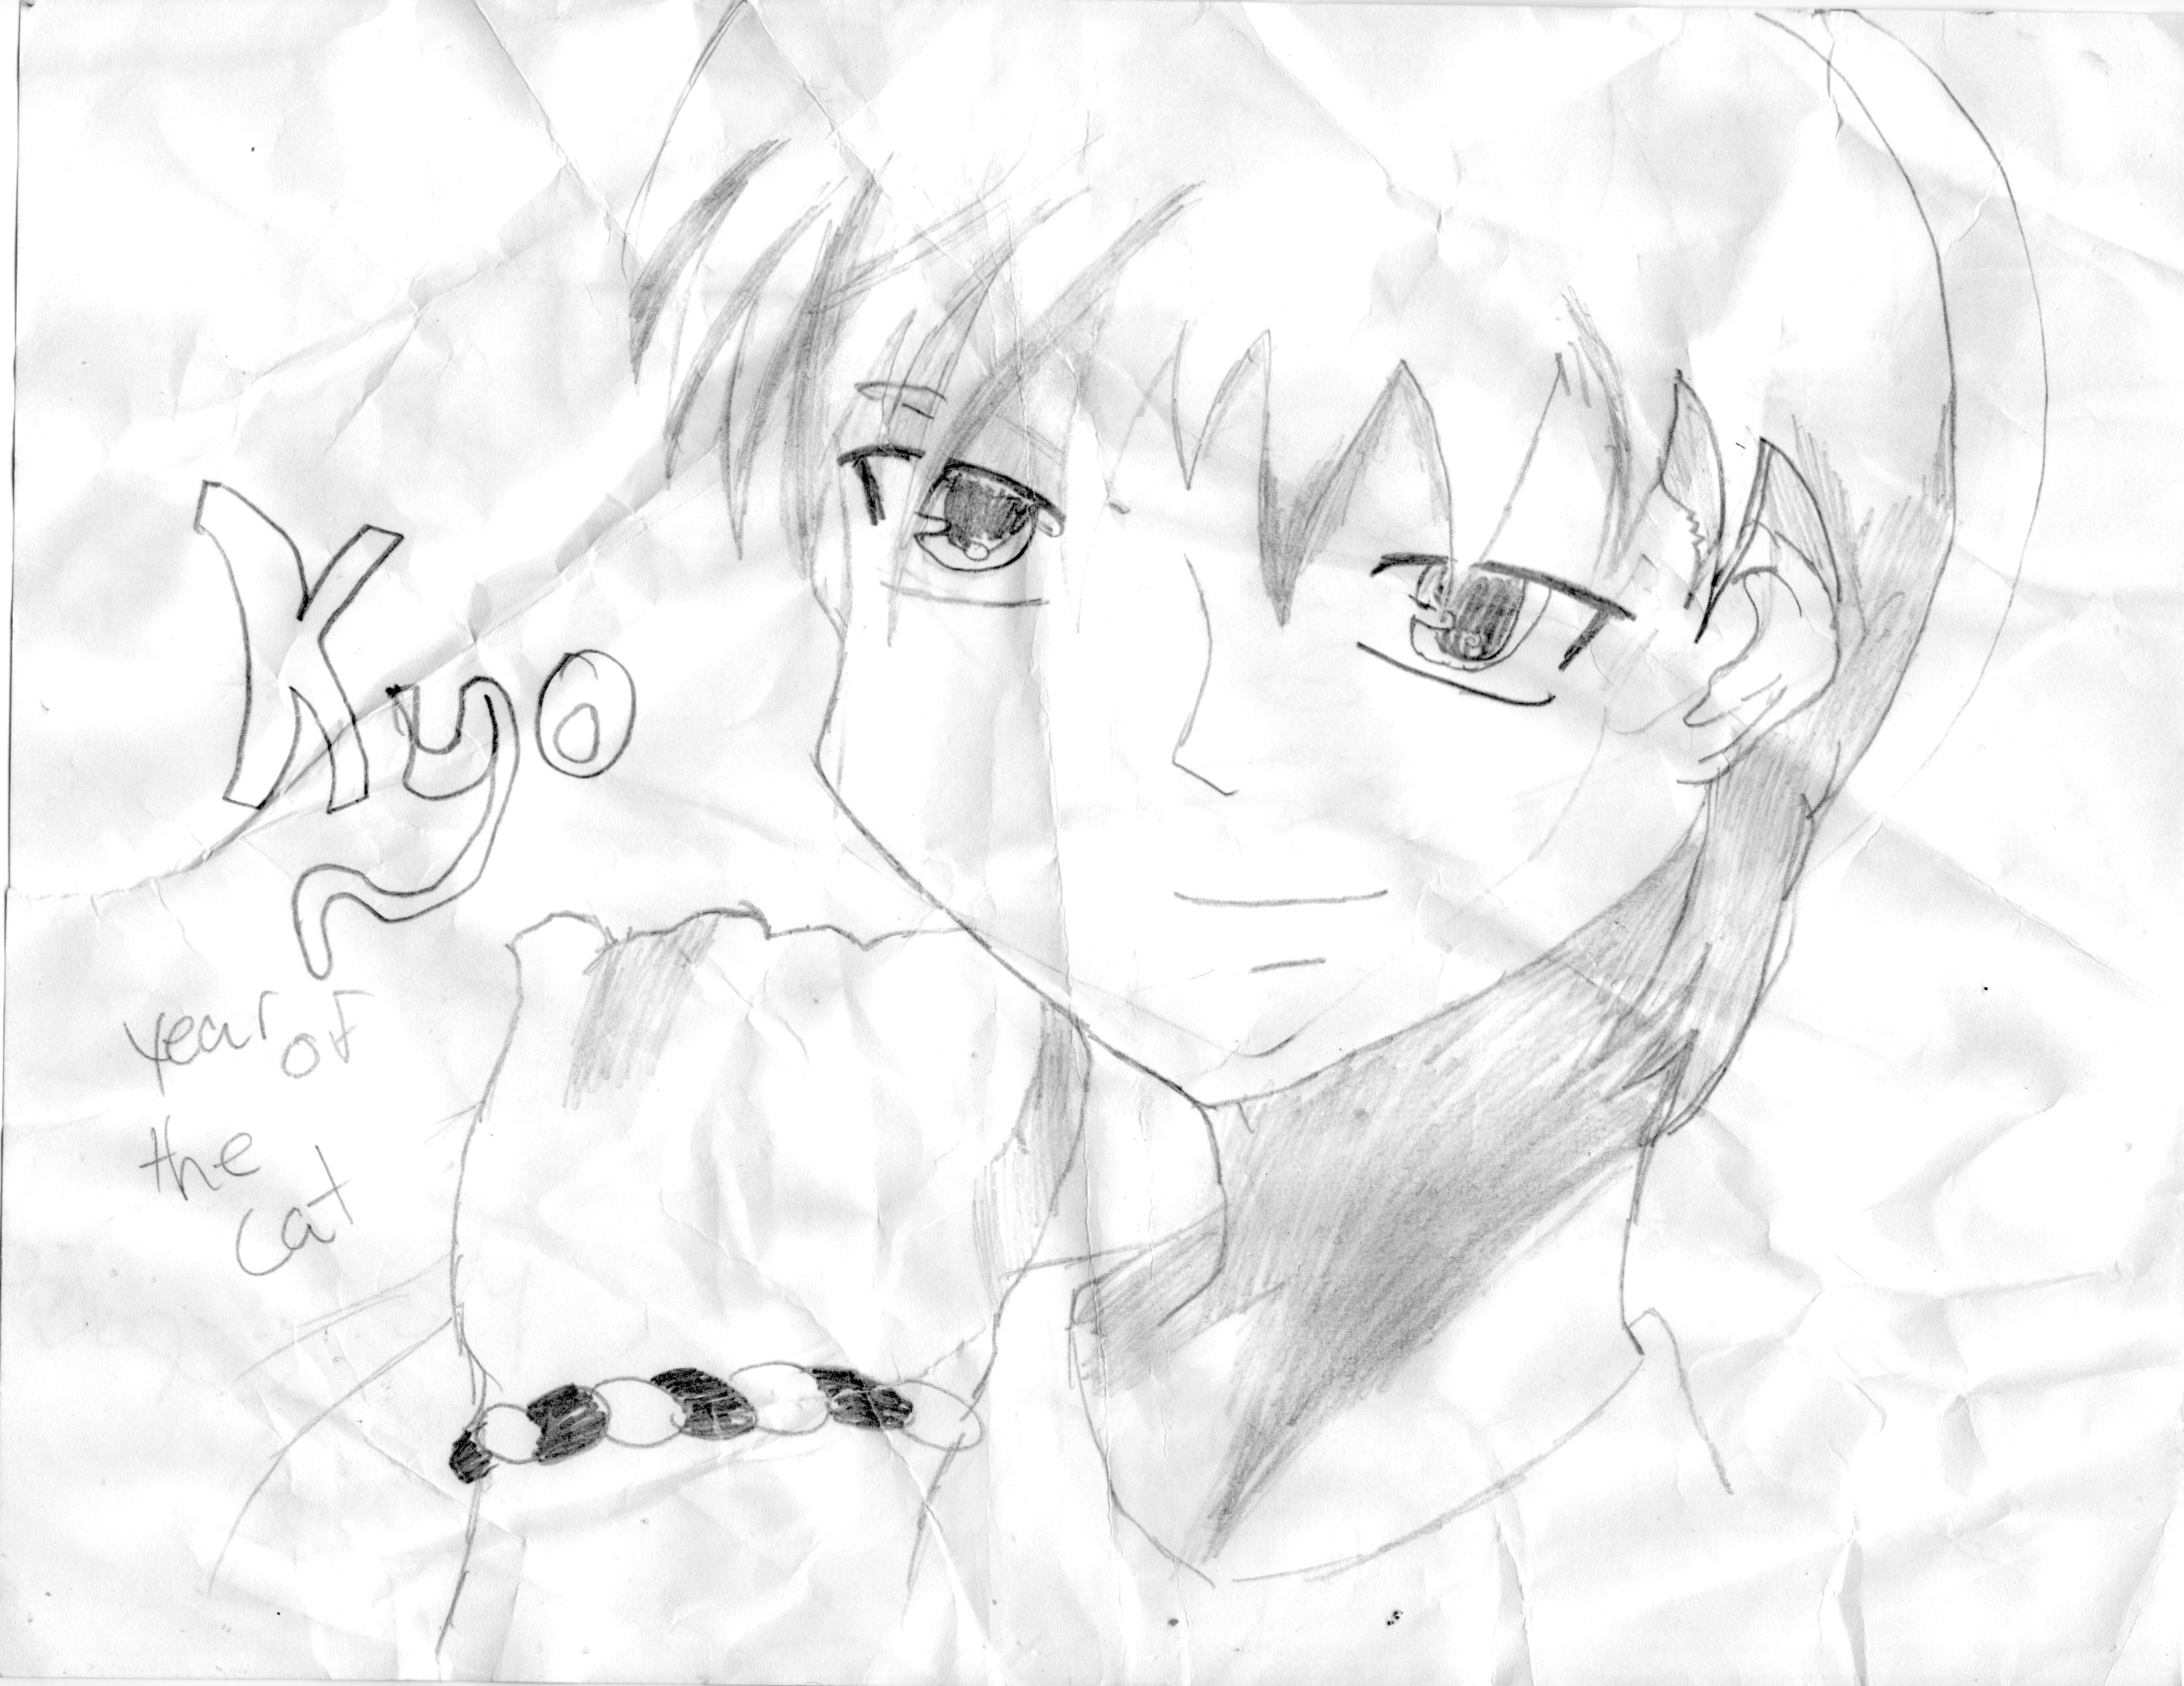 my 1st Kyo by Summer_Winds